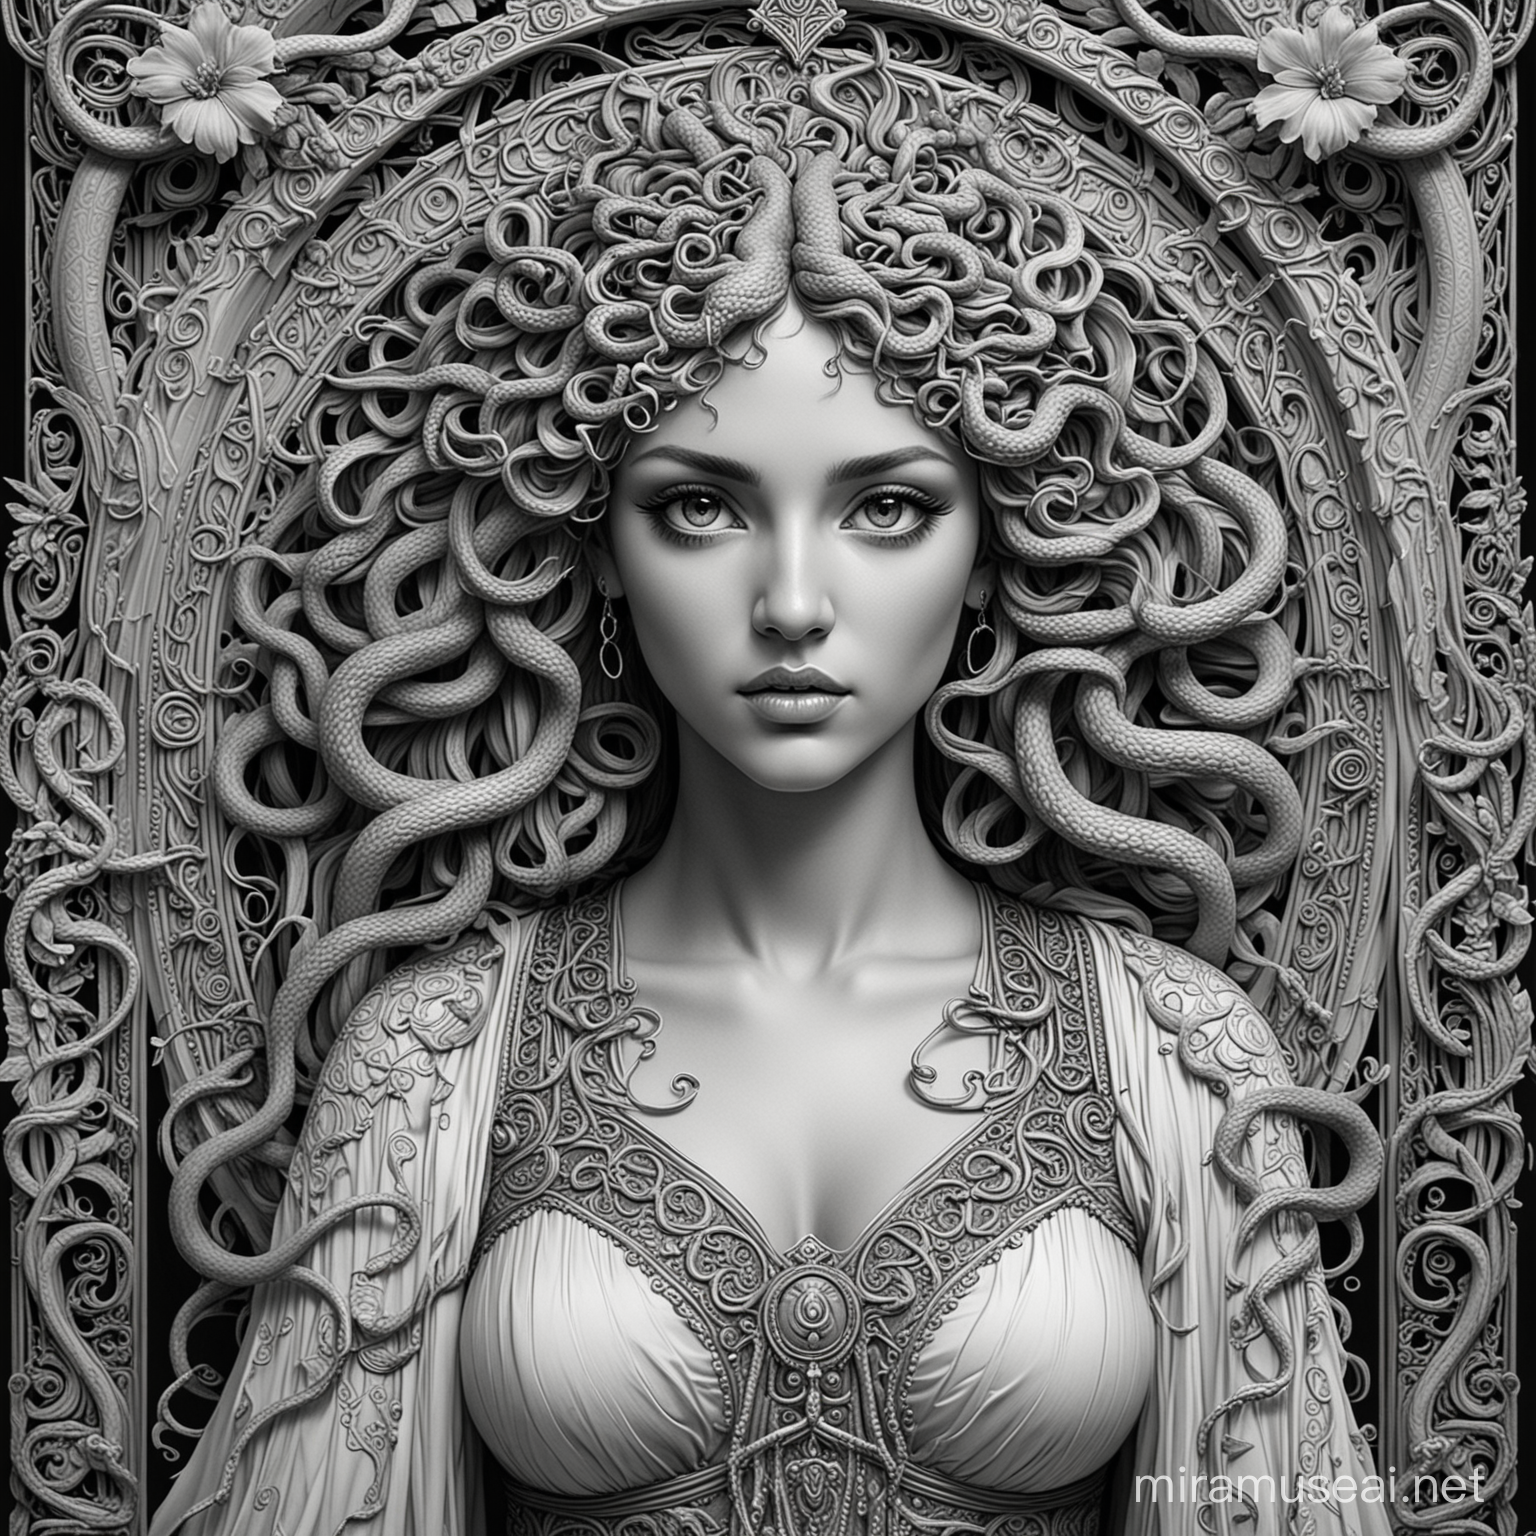 full sized, full length black and white line art illustration in art nouveau style of highly detailed beautiful medusa greek mythology character with large eyes and lush eyelashes wearing a flowing long gown decorated with snakes. The background is framed in royal scrolled filigree patterns. It is free of colors.